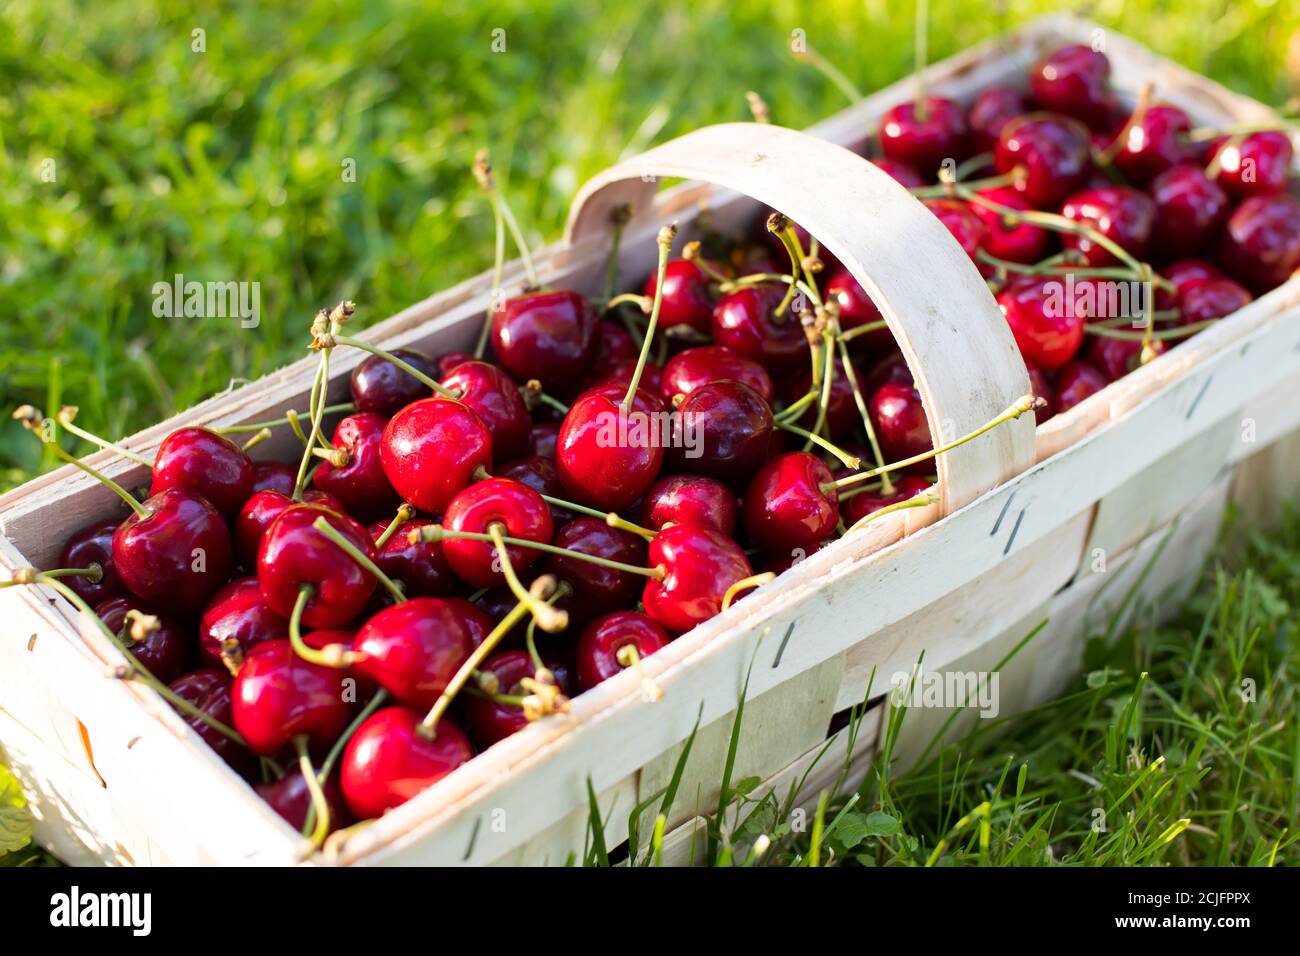 Ripe cherries in the basket on the lawn Stock Photo